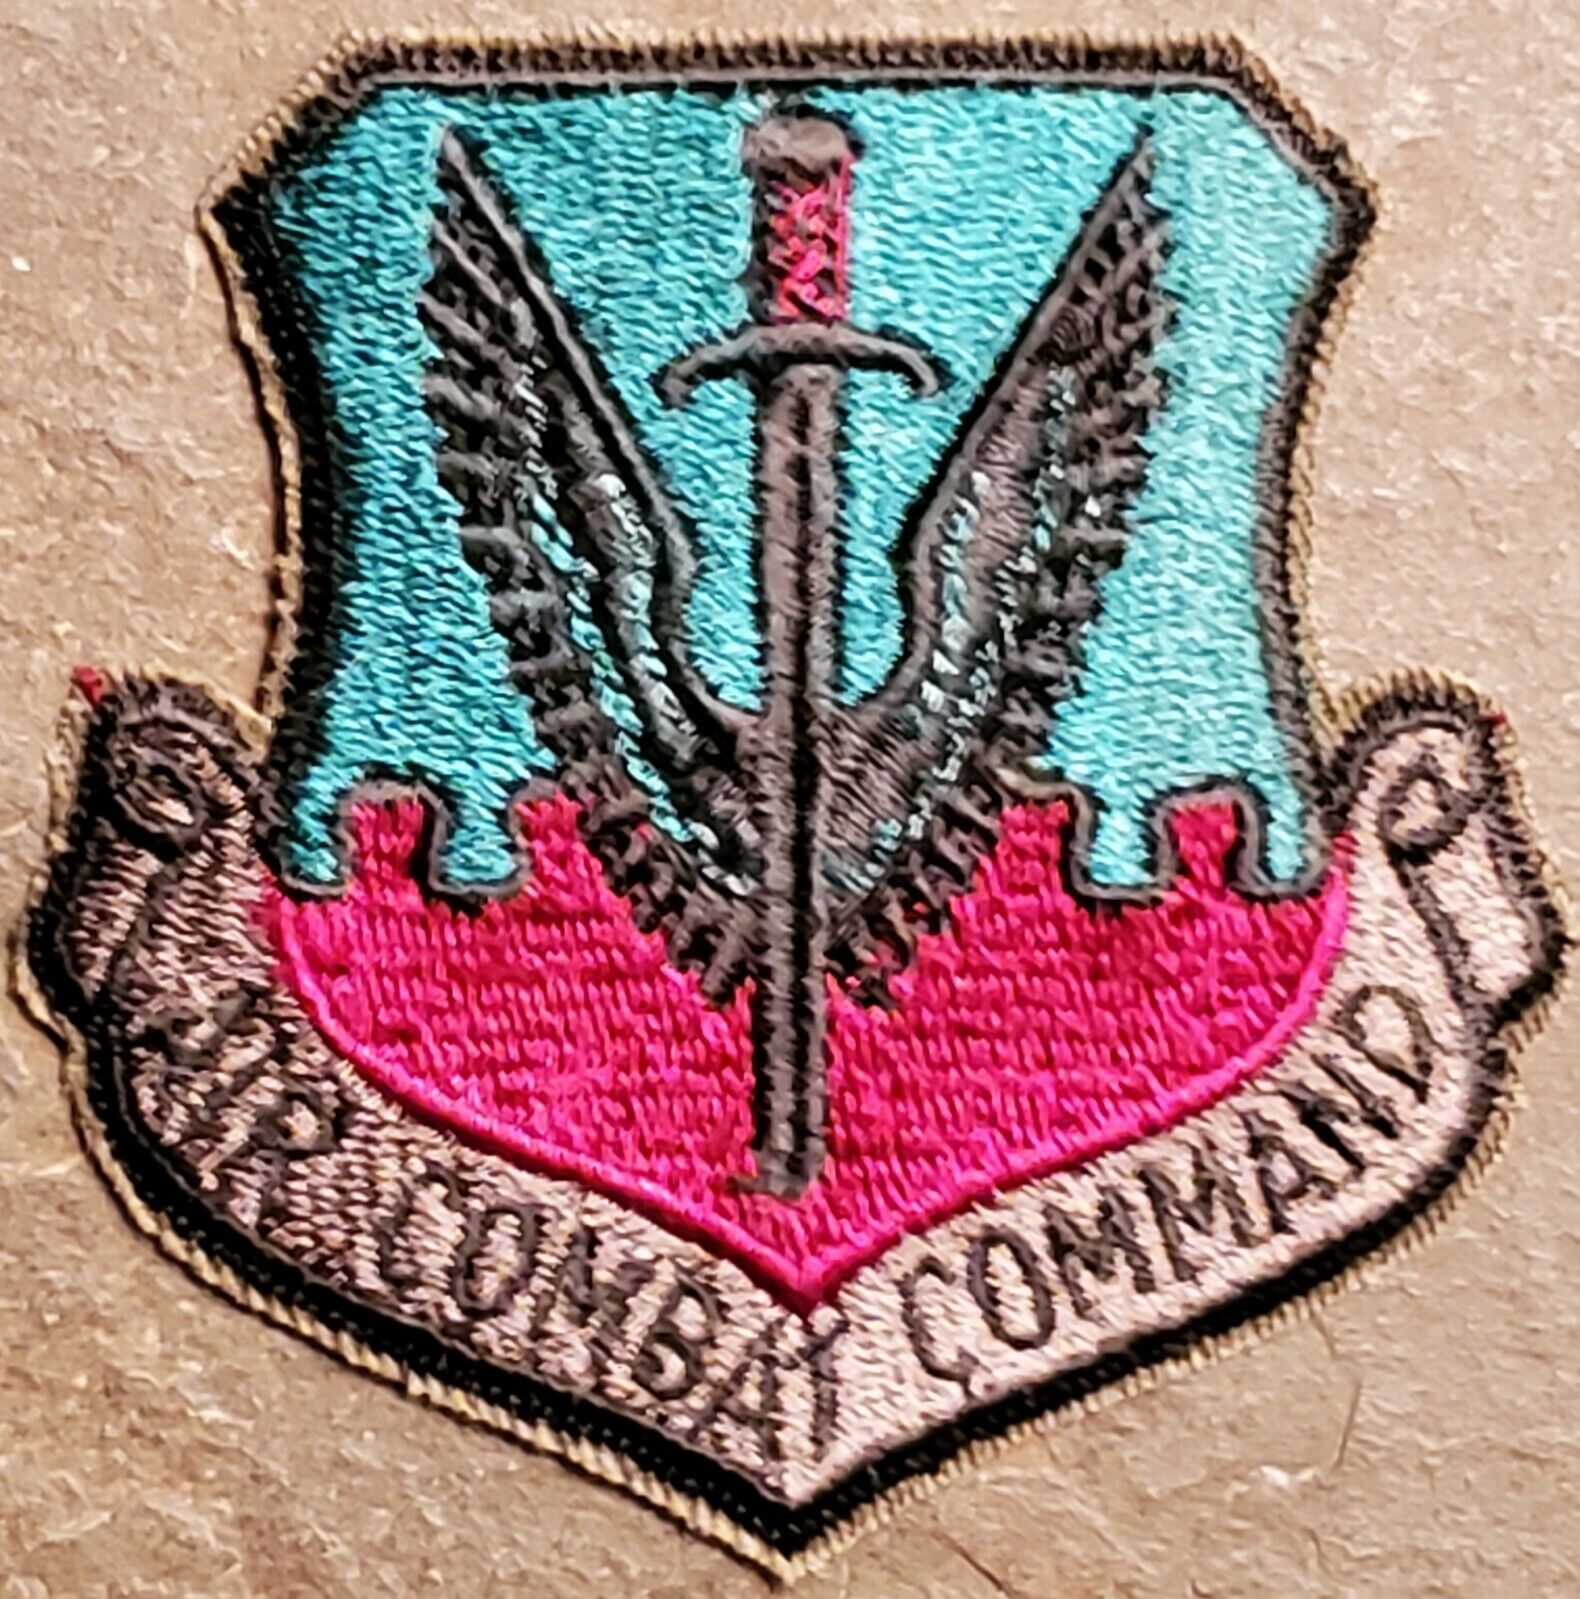 USAF AIR FORCE: AIR COMBAT COMMAND SUBDUED BDU PATCH VINTAGE ORIGINAL MILITARY